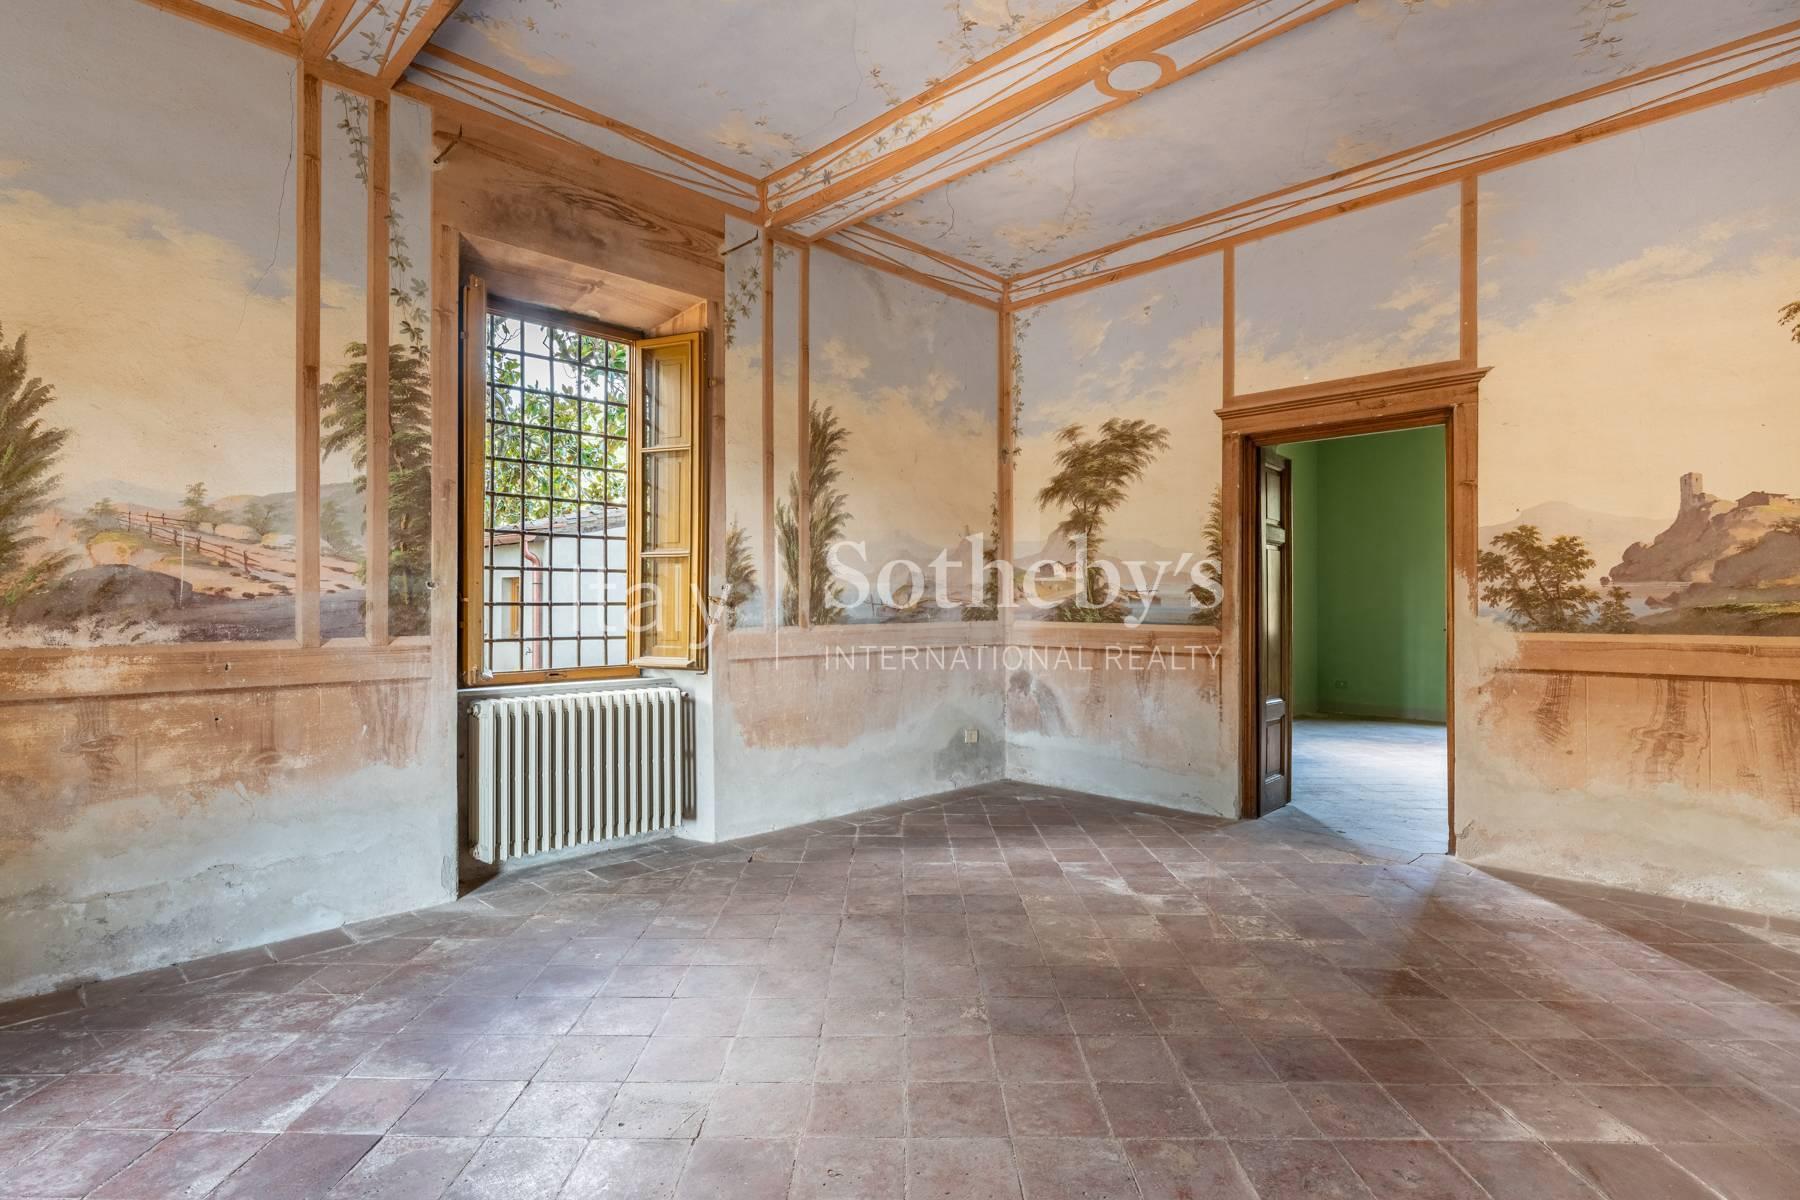 Superb villa with breathtaking views of the Lucca countryside - 7